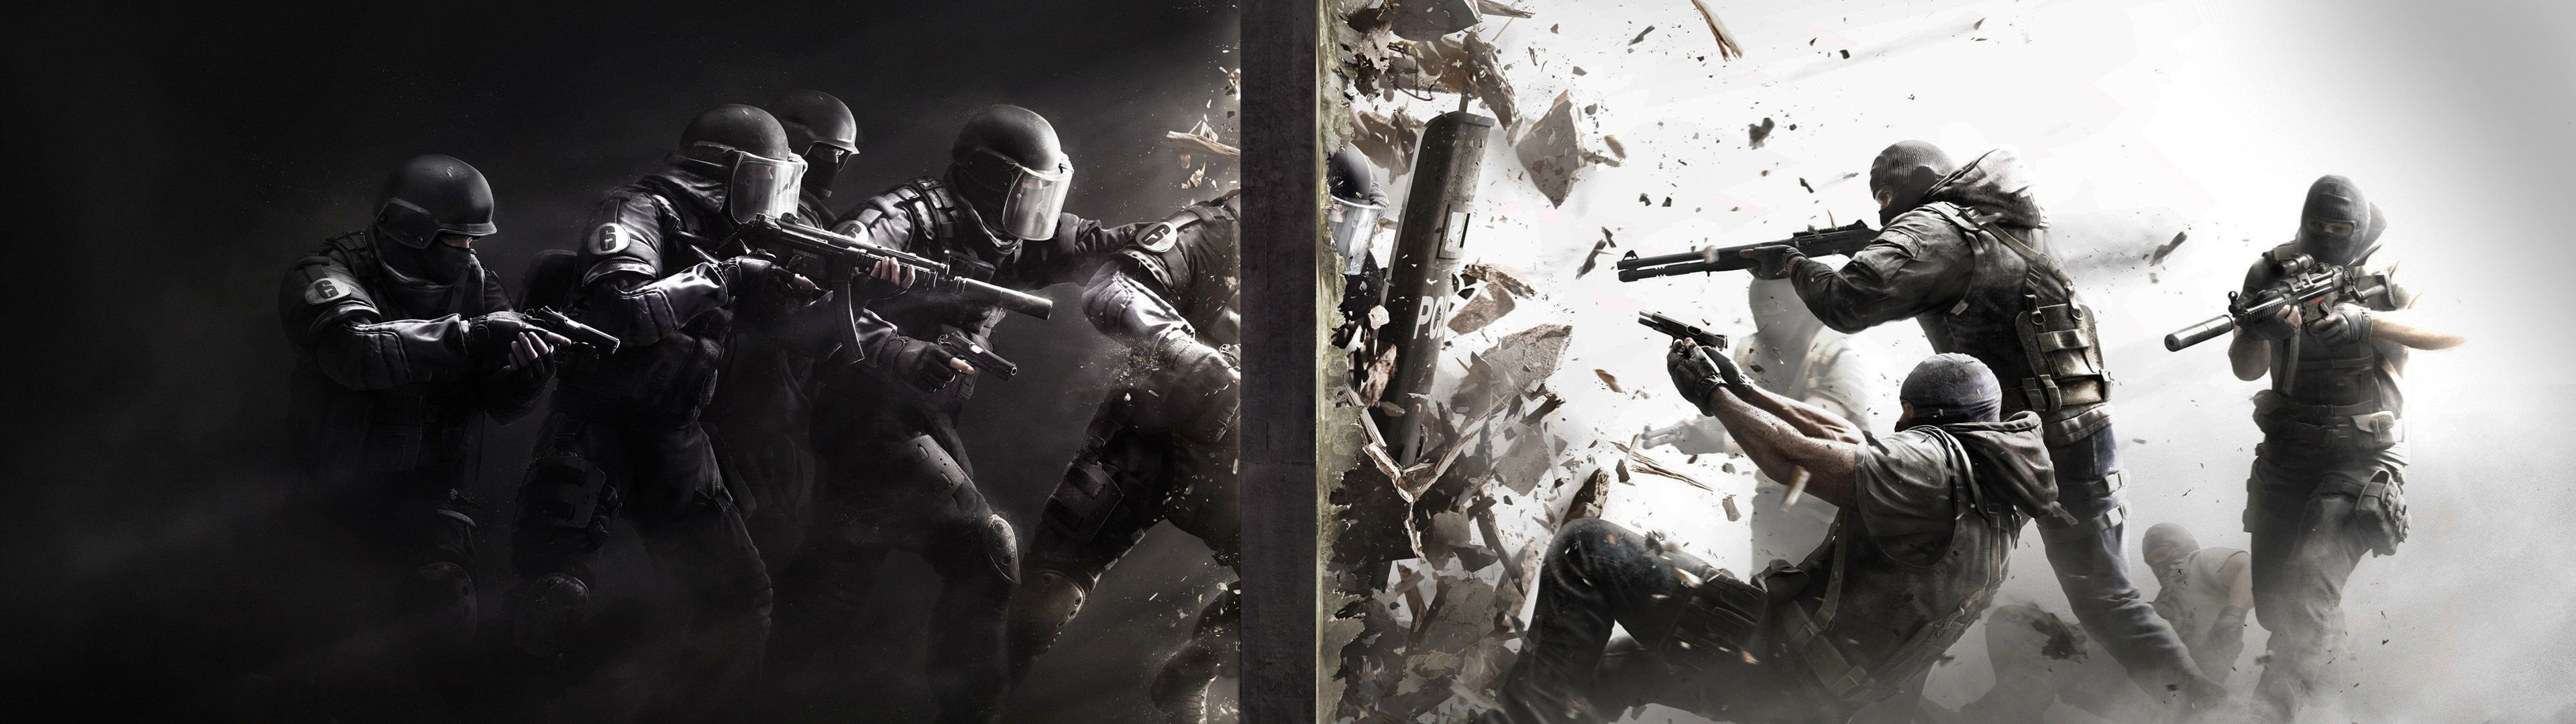 Gaming dual screen, HD wallpapers, Multiplayer games, Action-packed gameplay, 3840x1080 Dual Screen Desktop